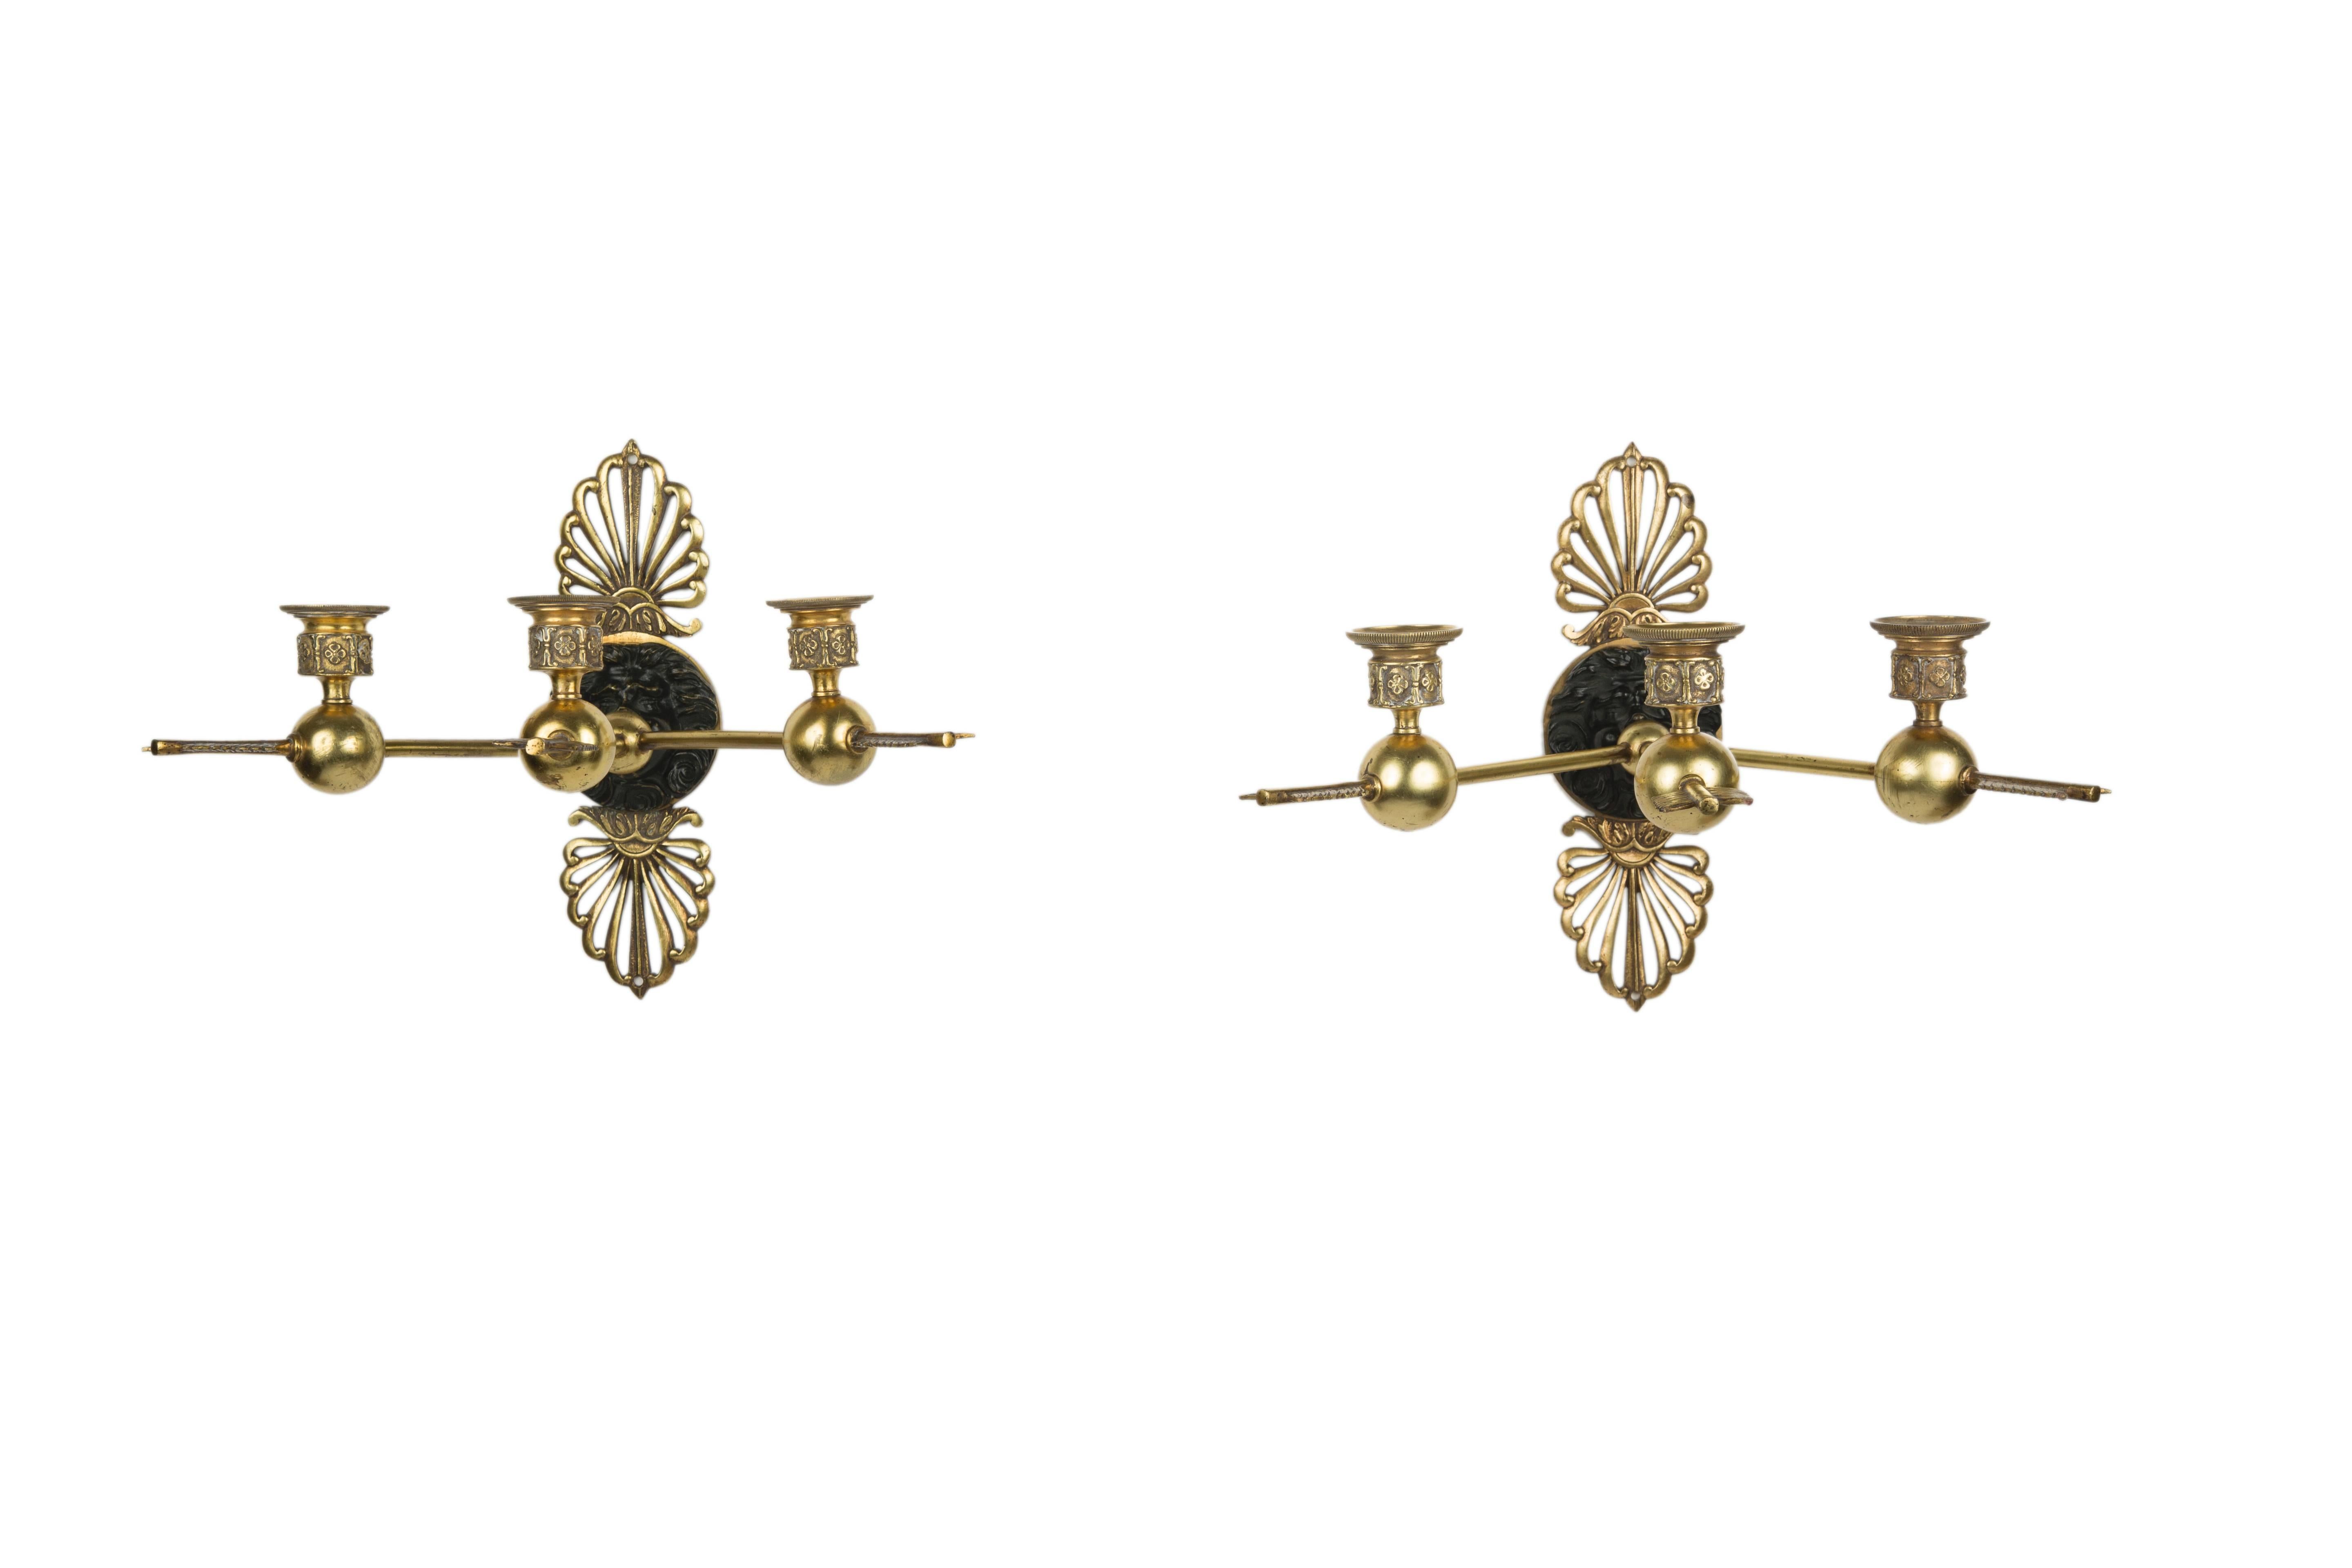 Pair of three-arm gilt bronze sconces each with arrows extending from a central patinated bronze figural plaque, France, Early 19th century.